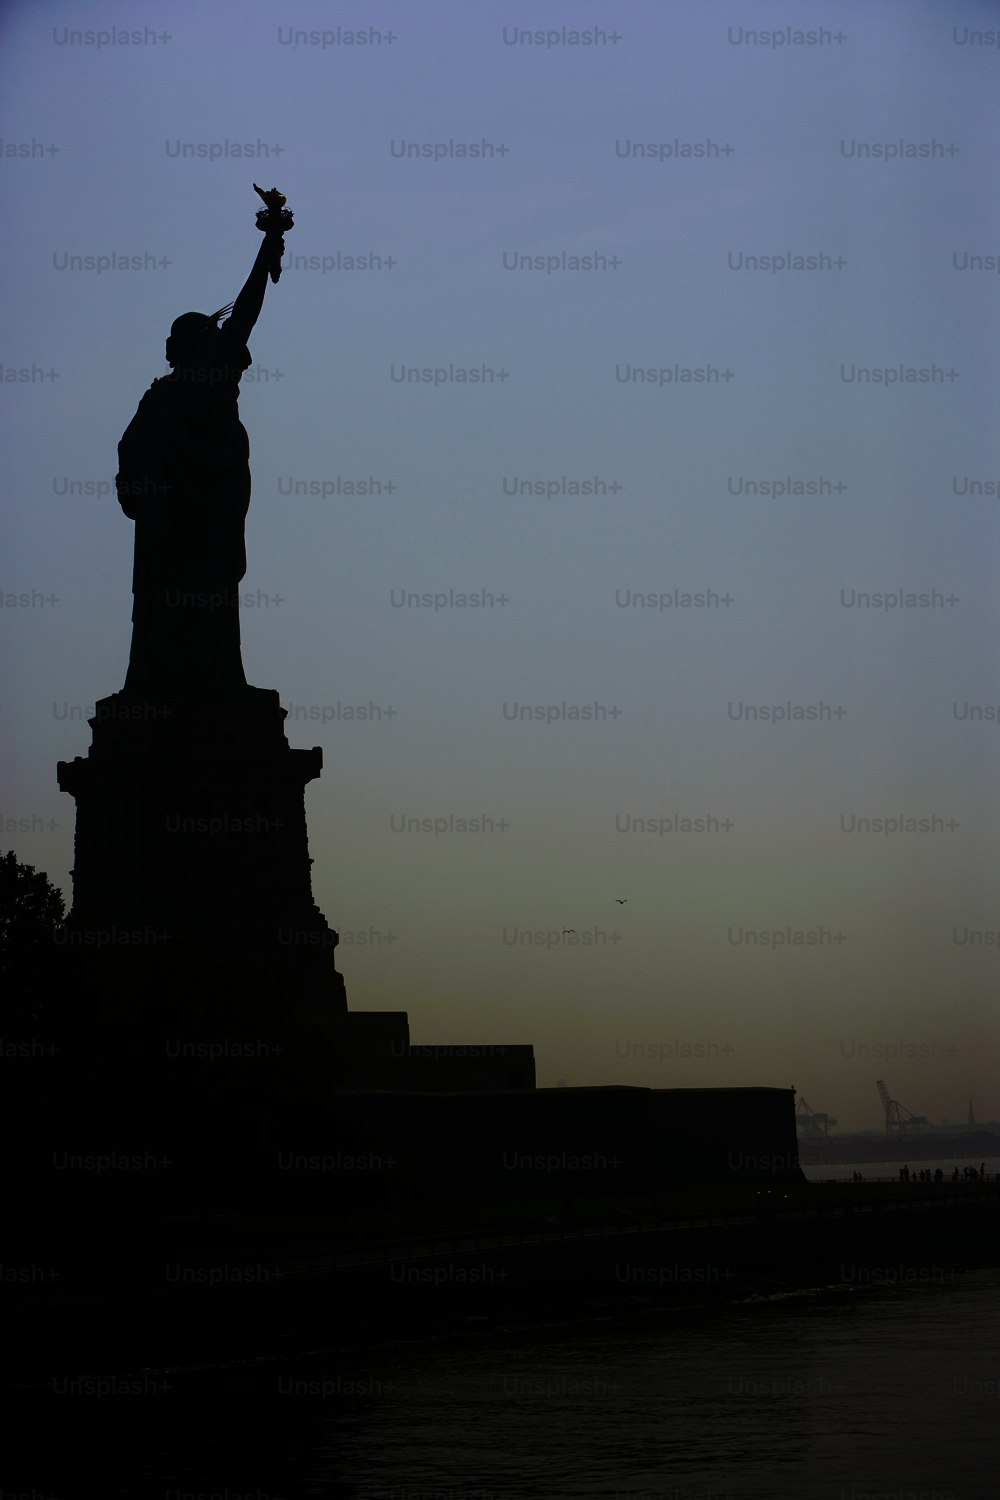 the statue of liberty stands on the edge of a body of water